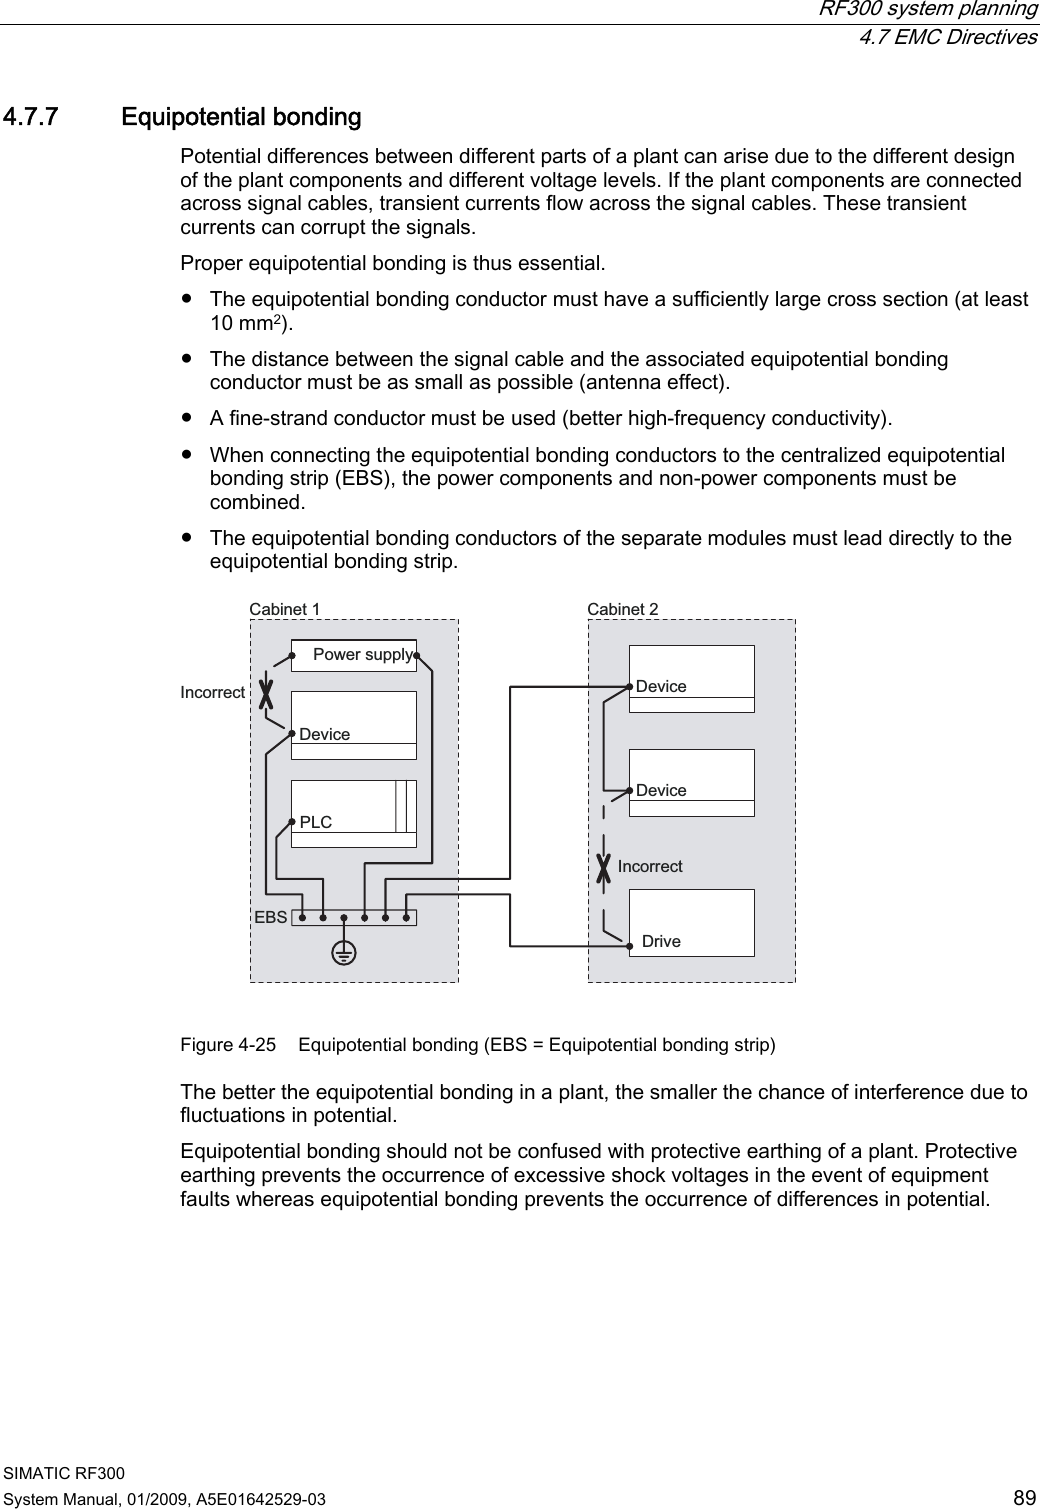  RF300 system planning  4.7 EMC Directives SIMATIC RF300 System Manual, 01/2009, A5E01642529-03  89 4.7.7 Equipotential bonding Potential differences between different parts of a plant can arise due to the different design of the plant components and different voltage levels. If the plant components are connected across signal cables, transient currents flow across the signal cables. These transient currents can corrupt the signals. Proper equipotential bonding is thus essential.  ● The equipotential bonding conductor must have a sufficiently large cross section (at least 10 mm2). ● The distance between the signal cable and the associated equipotential bonding conductor must be as small as possible (antenna effect). ● A fine-strand conductor must be used (better high-frequency conductivity). ● When connecting the equipotential bonding conductors to the centralized equipotential bonding strip (EBS), the power components and non-power components must be combined. ● The equipotential bonding conductors of the separate modules must lead directly to the equipotential bonding strip. &amp;DELQHW &amp;DELQHW,QFRUUHFW3RZHUVXSSO\&apos;ULYH&apos;HYLFH3/&amp;(%6&apos;HYLFH&apos;HYLFH,QFRUUHFW Figure 4-25  Equipotential bonding (EBS = Equipotential bonding strip) The better the equipotential bonding in a plant, the smaller the chance of interference due to fluctuations in potential. Equipotential bonding should not be confused with protective earthing of a plant. Protective earthing prevents the occurrence of excessive shock voltages in the event of equipment faults whereas equipotential bonding prevents the occurrence of differences in potential. 